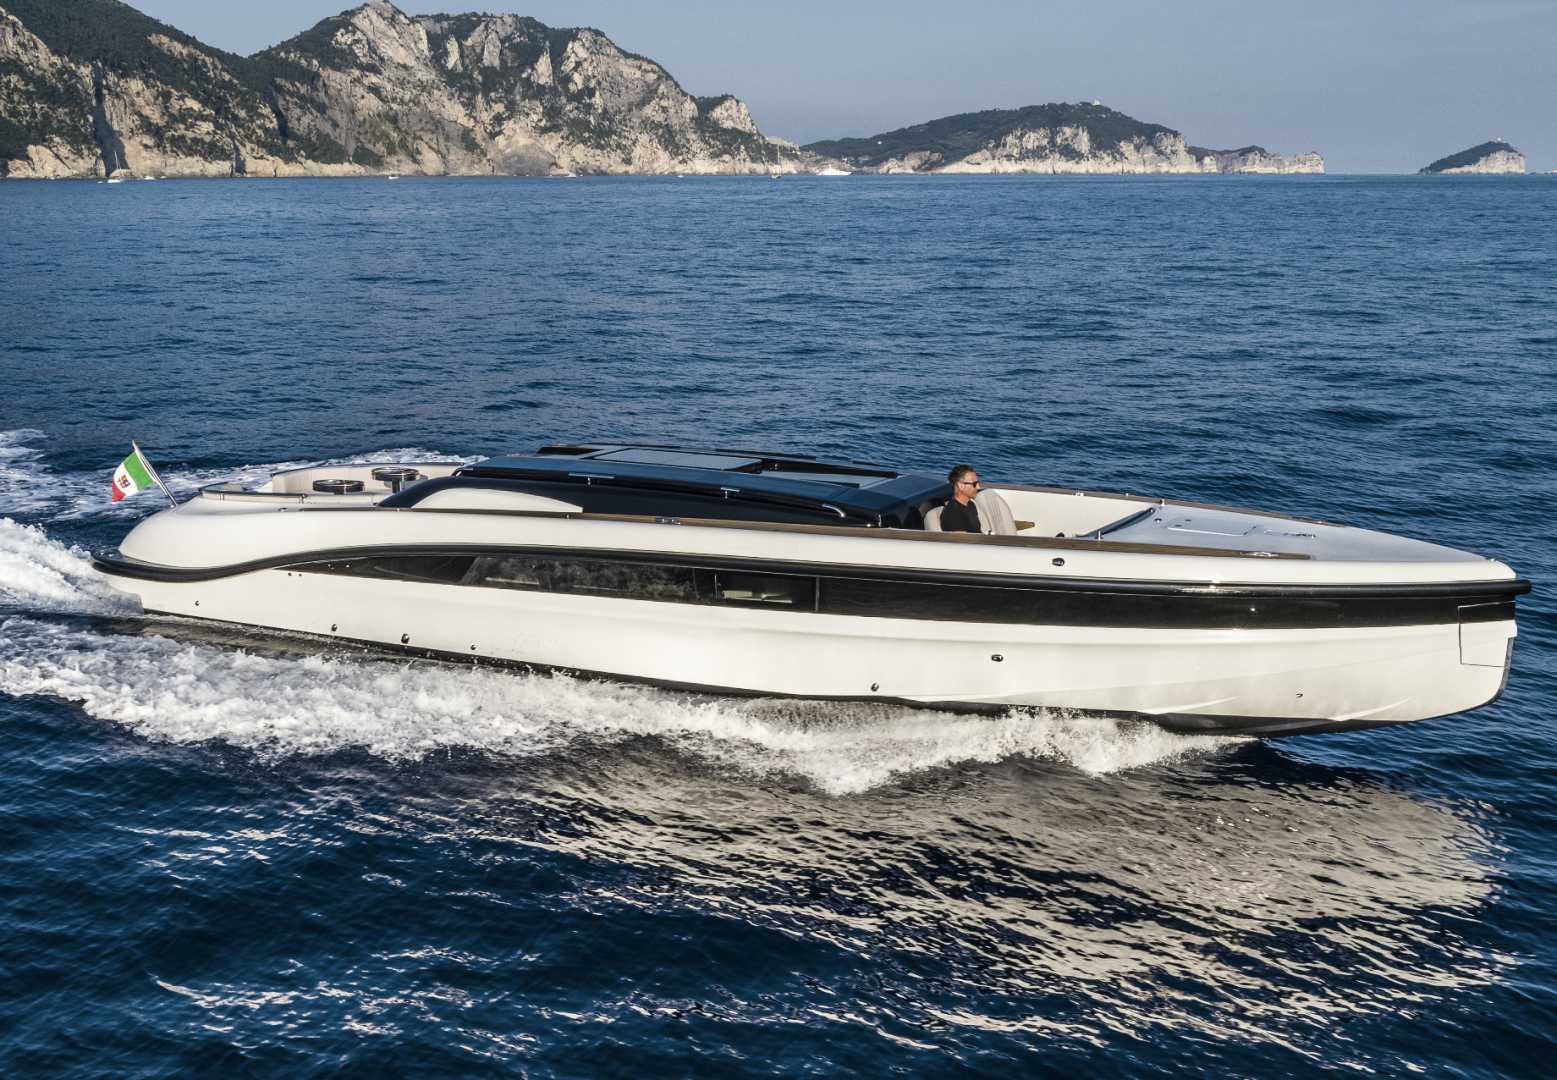 New WB14 limousine tender: high performance and on board safety